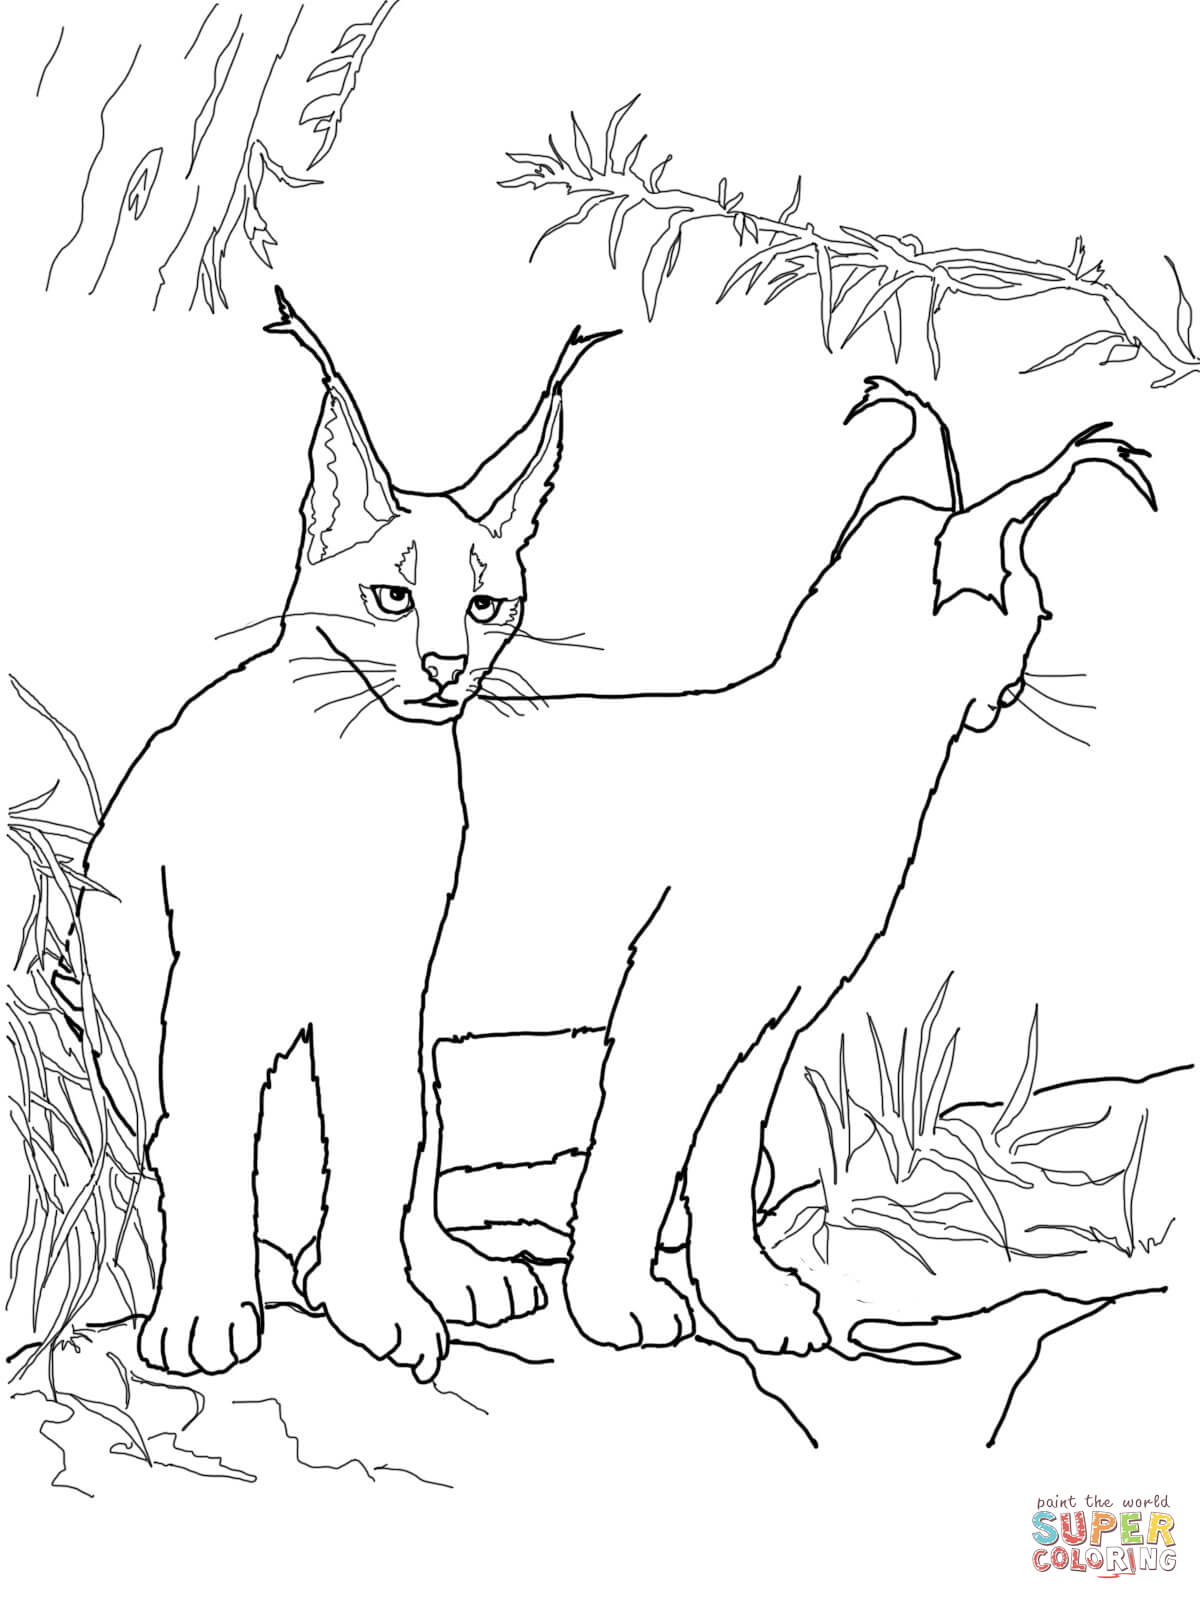 Caracal kittens coloring page free printable coloring pages